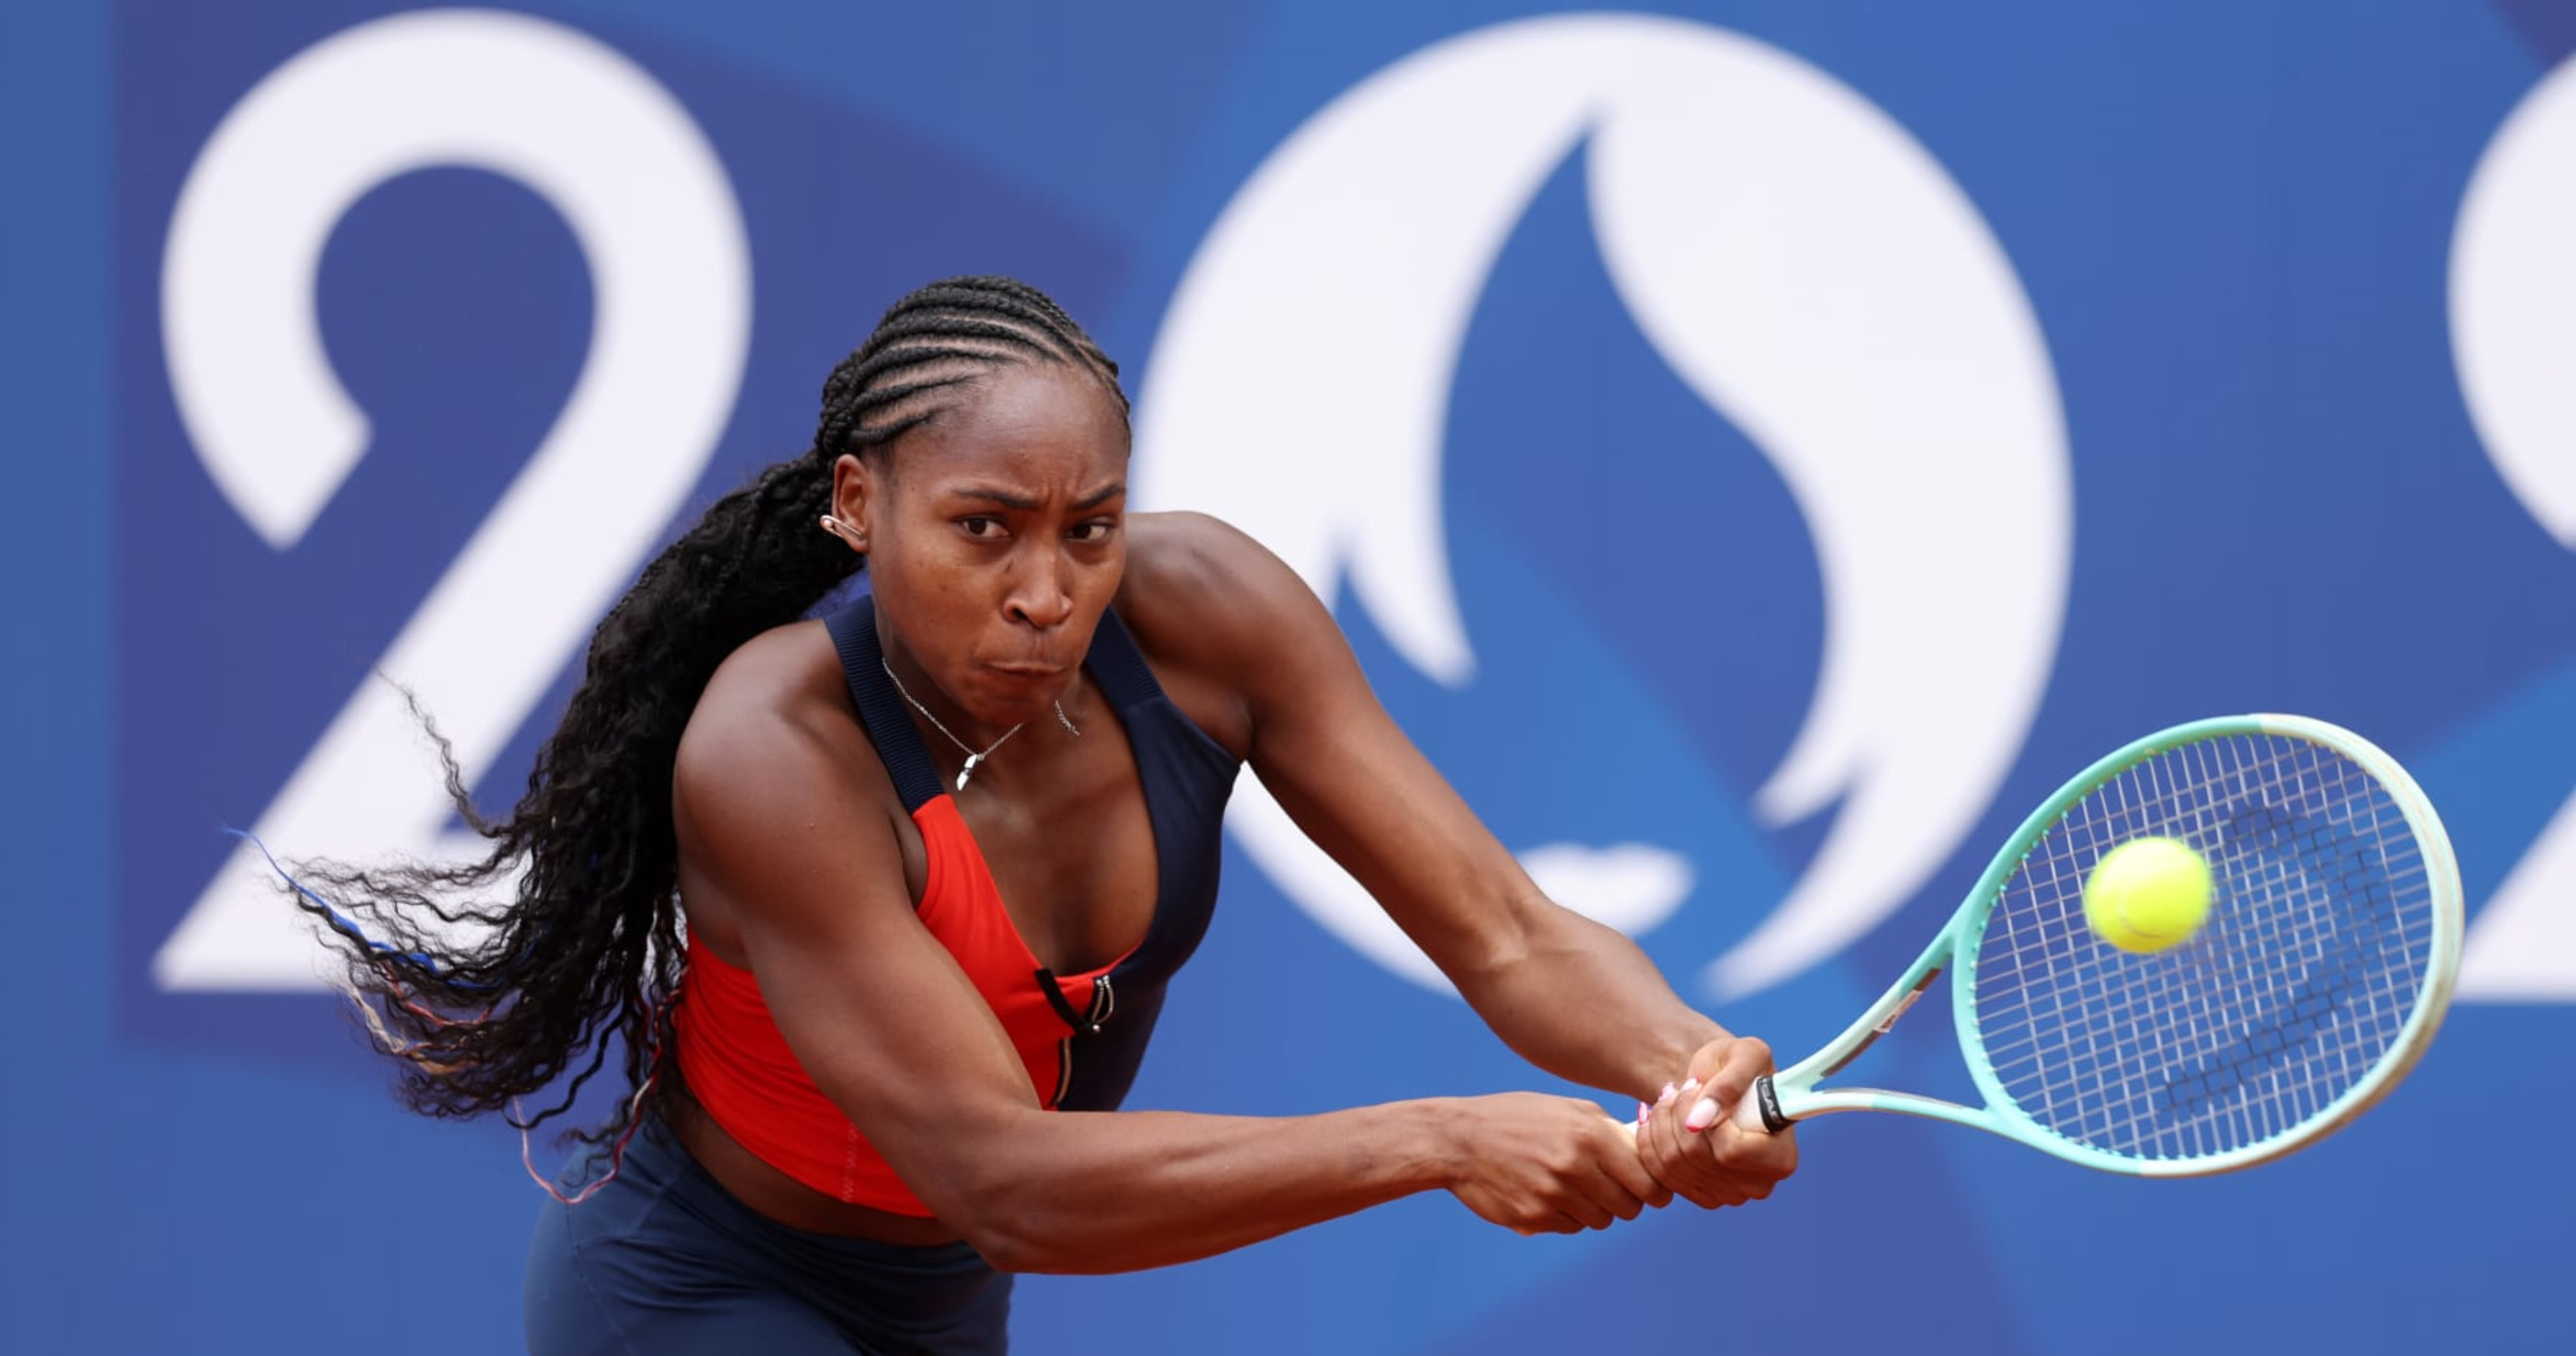 Coco Gauff Joins LeBron James as USA Flag Bearers for 2024 Olympics Opening Ceremony